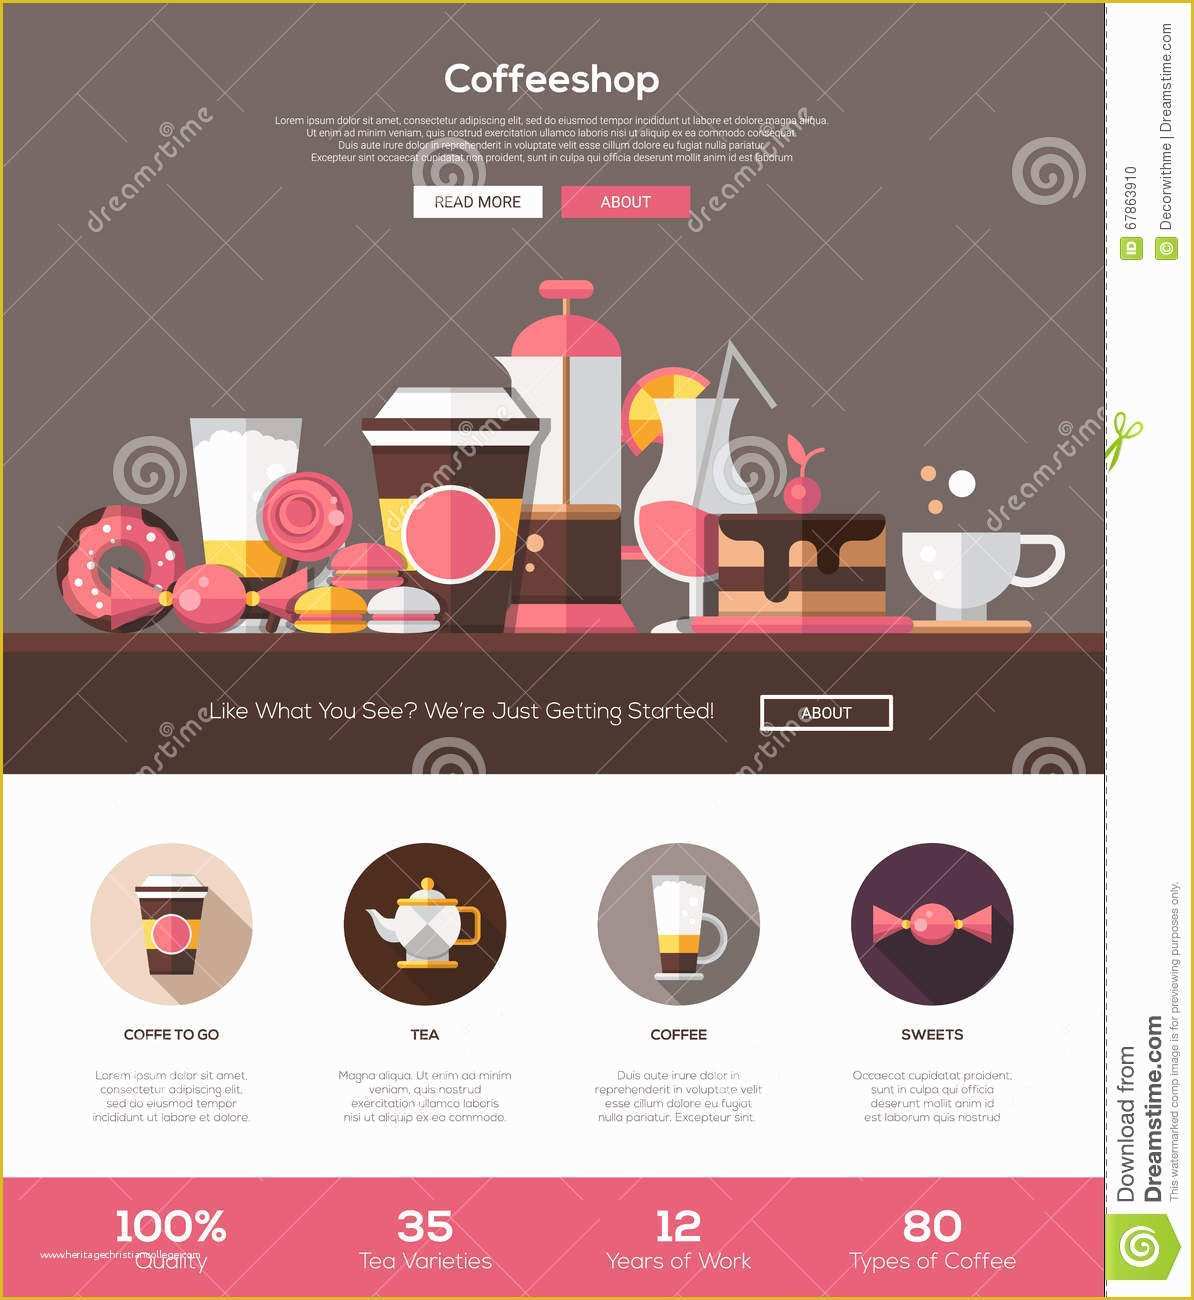 Coffee Shop Website Template Free Download Of Coffee Shop Cafe Bakery Website Template with Header and